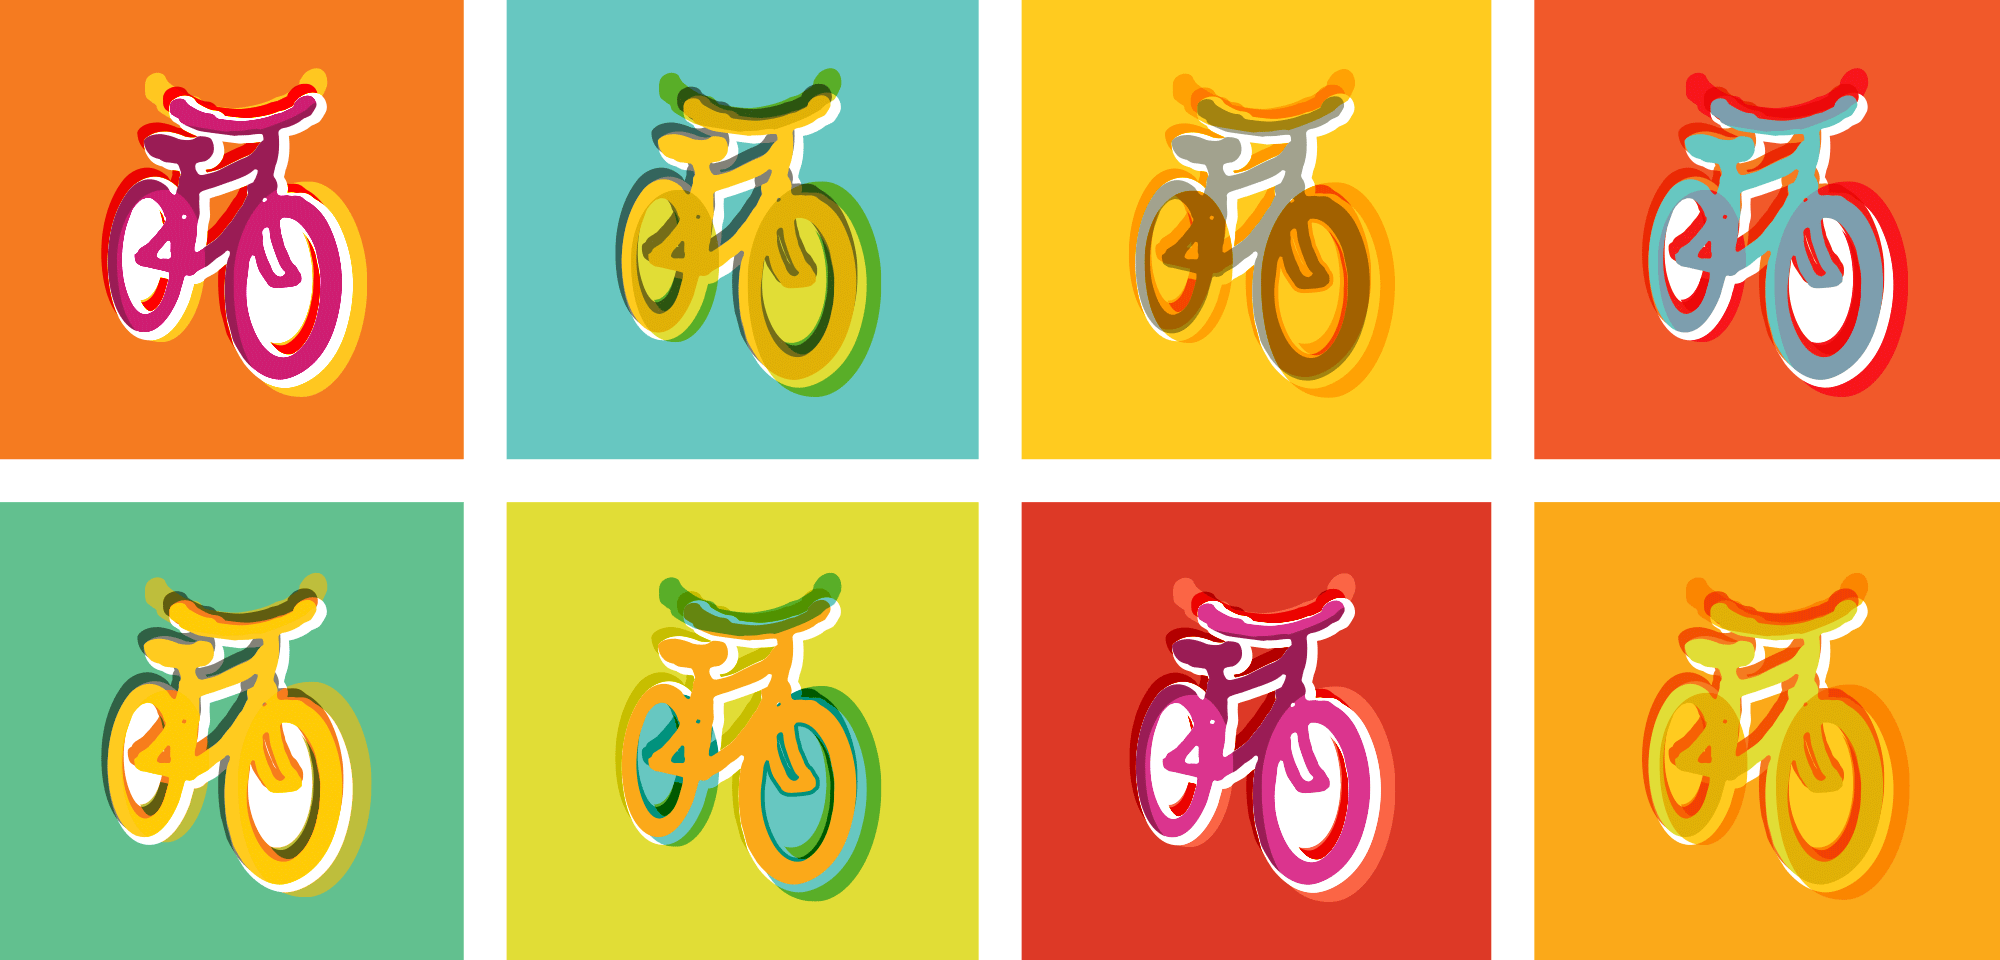 Colorful illustrations of a bike, which is an icon for Great Park Neighborhoods